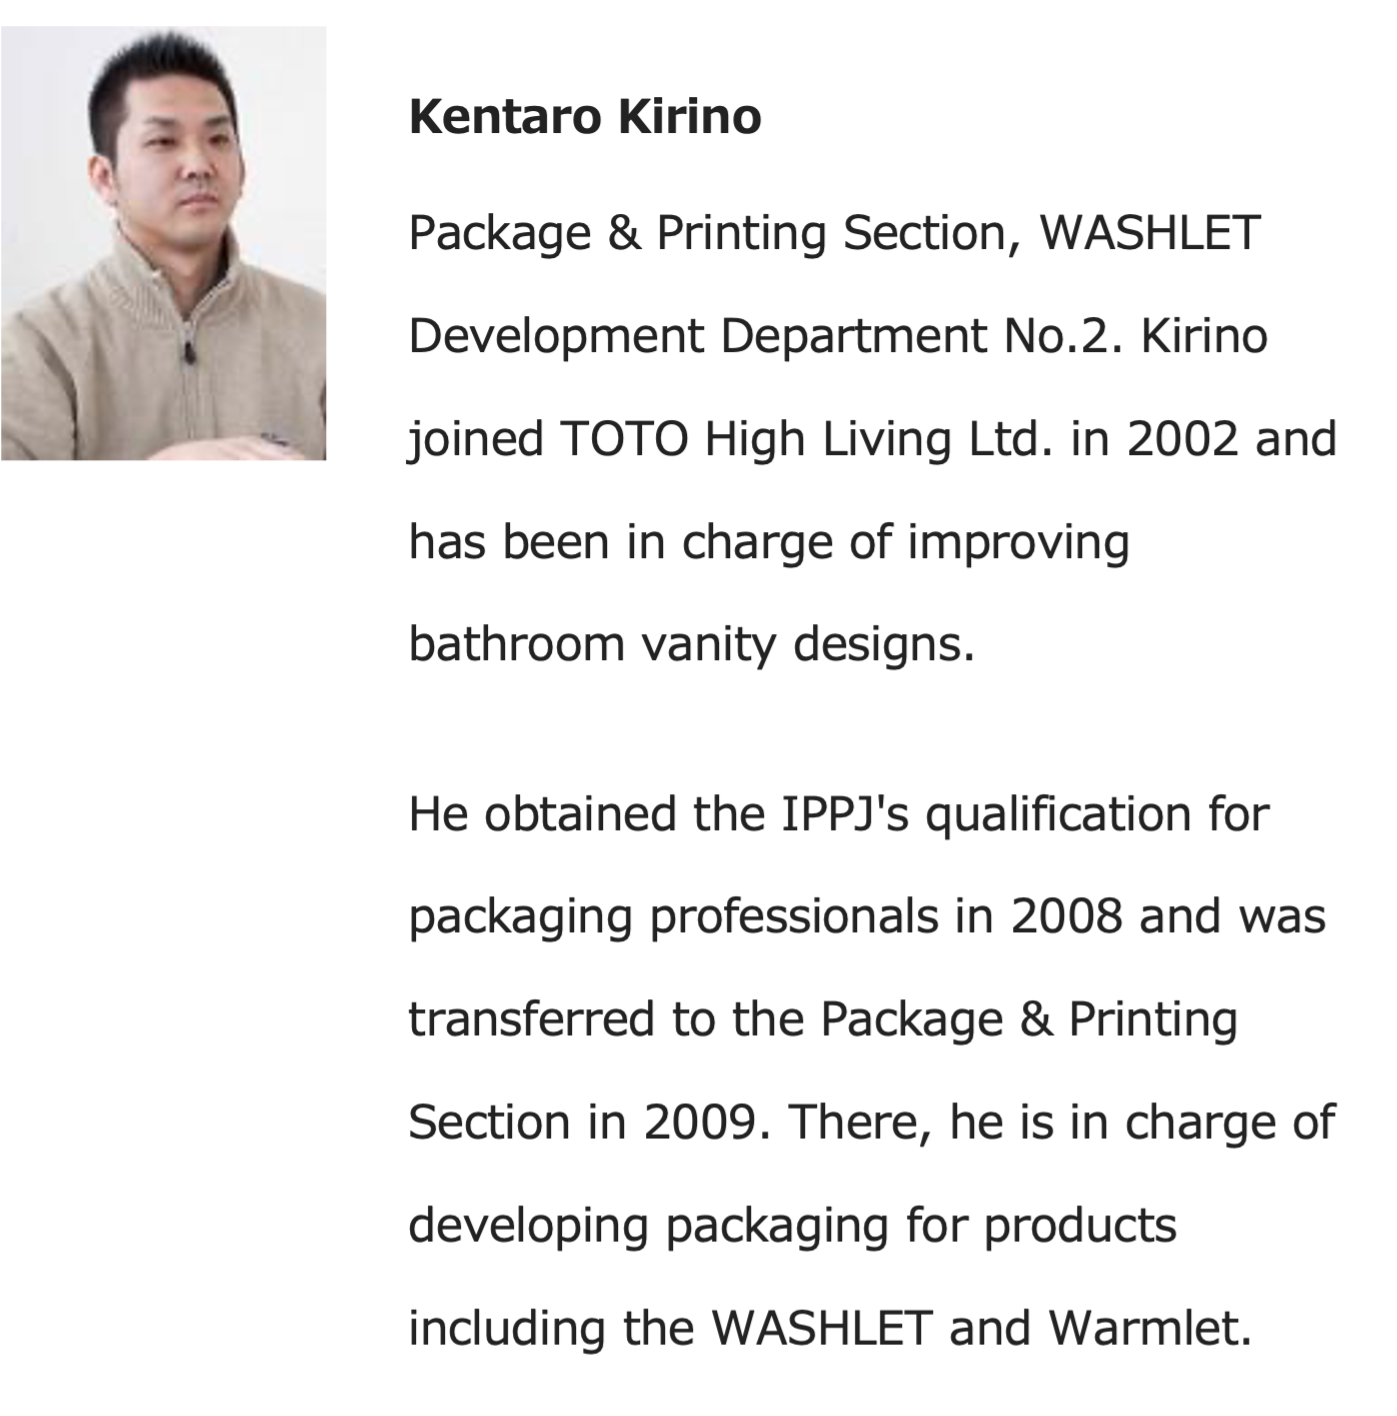 Kentaro Kirino - Package & Printing Section, WASHLET Development Department No.2. Kirino joined TOTO High Living Ltd. in 2002 and has been in charge of improving bathroom vanity designs. He obtained the IOOJ's qualification for packaging professionals in 2008 and was transferred to the Package & Printing Section in 2009. There, he is in charge of developing packaging for products including the WASHLET and Warmlet.